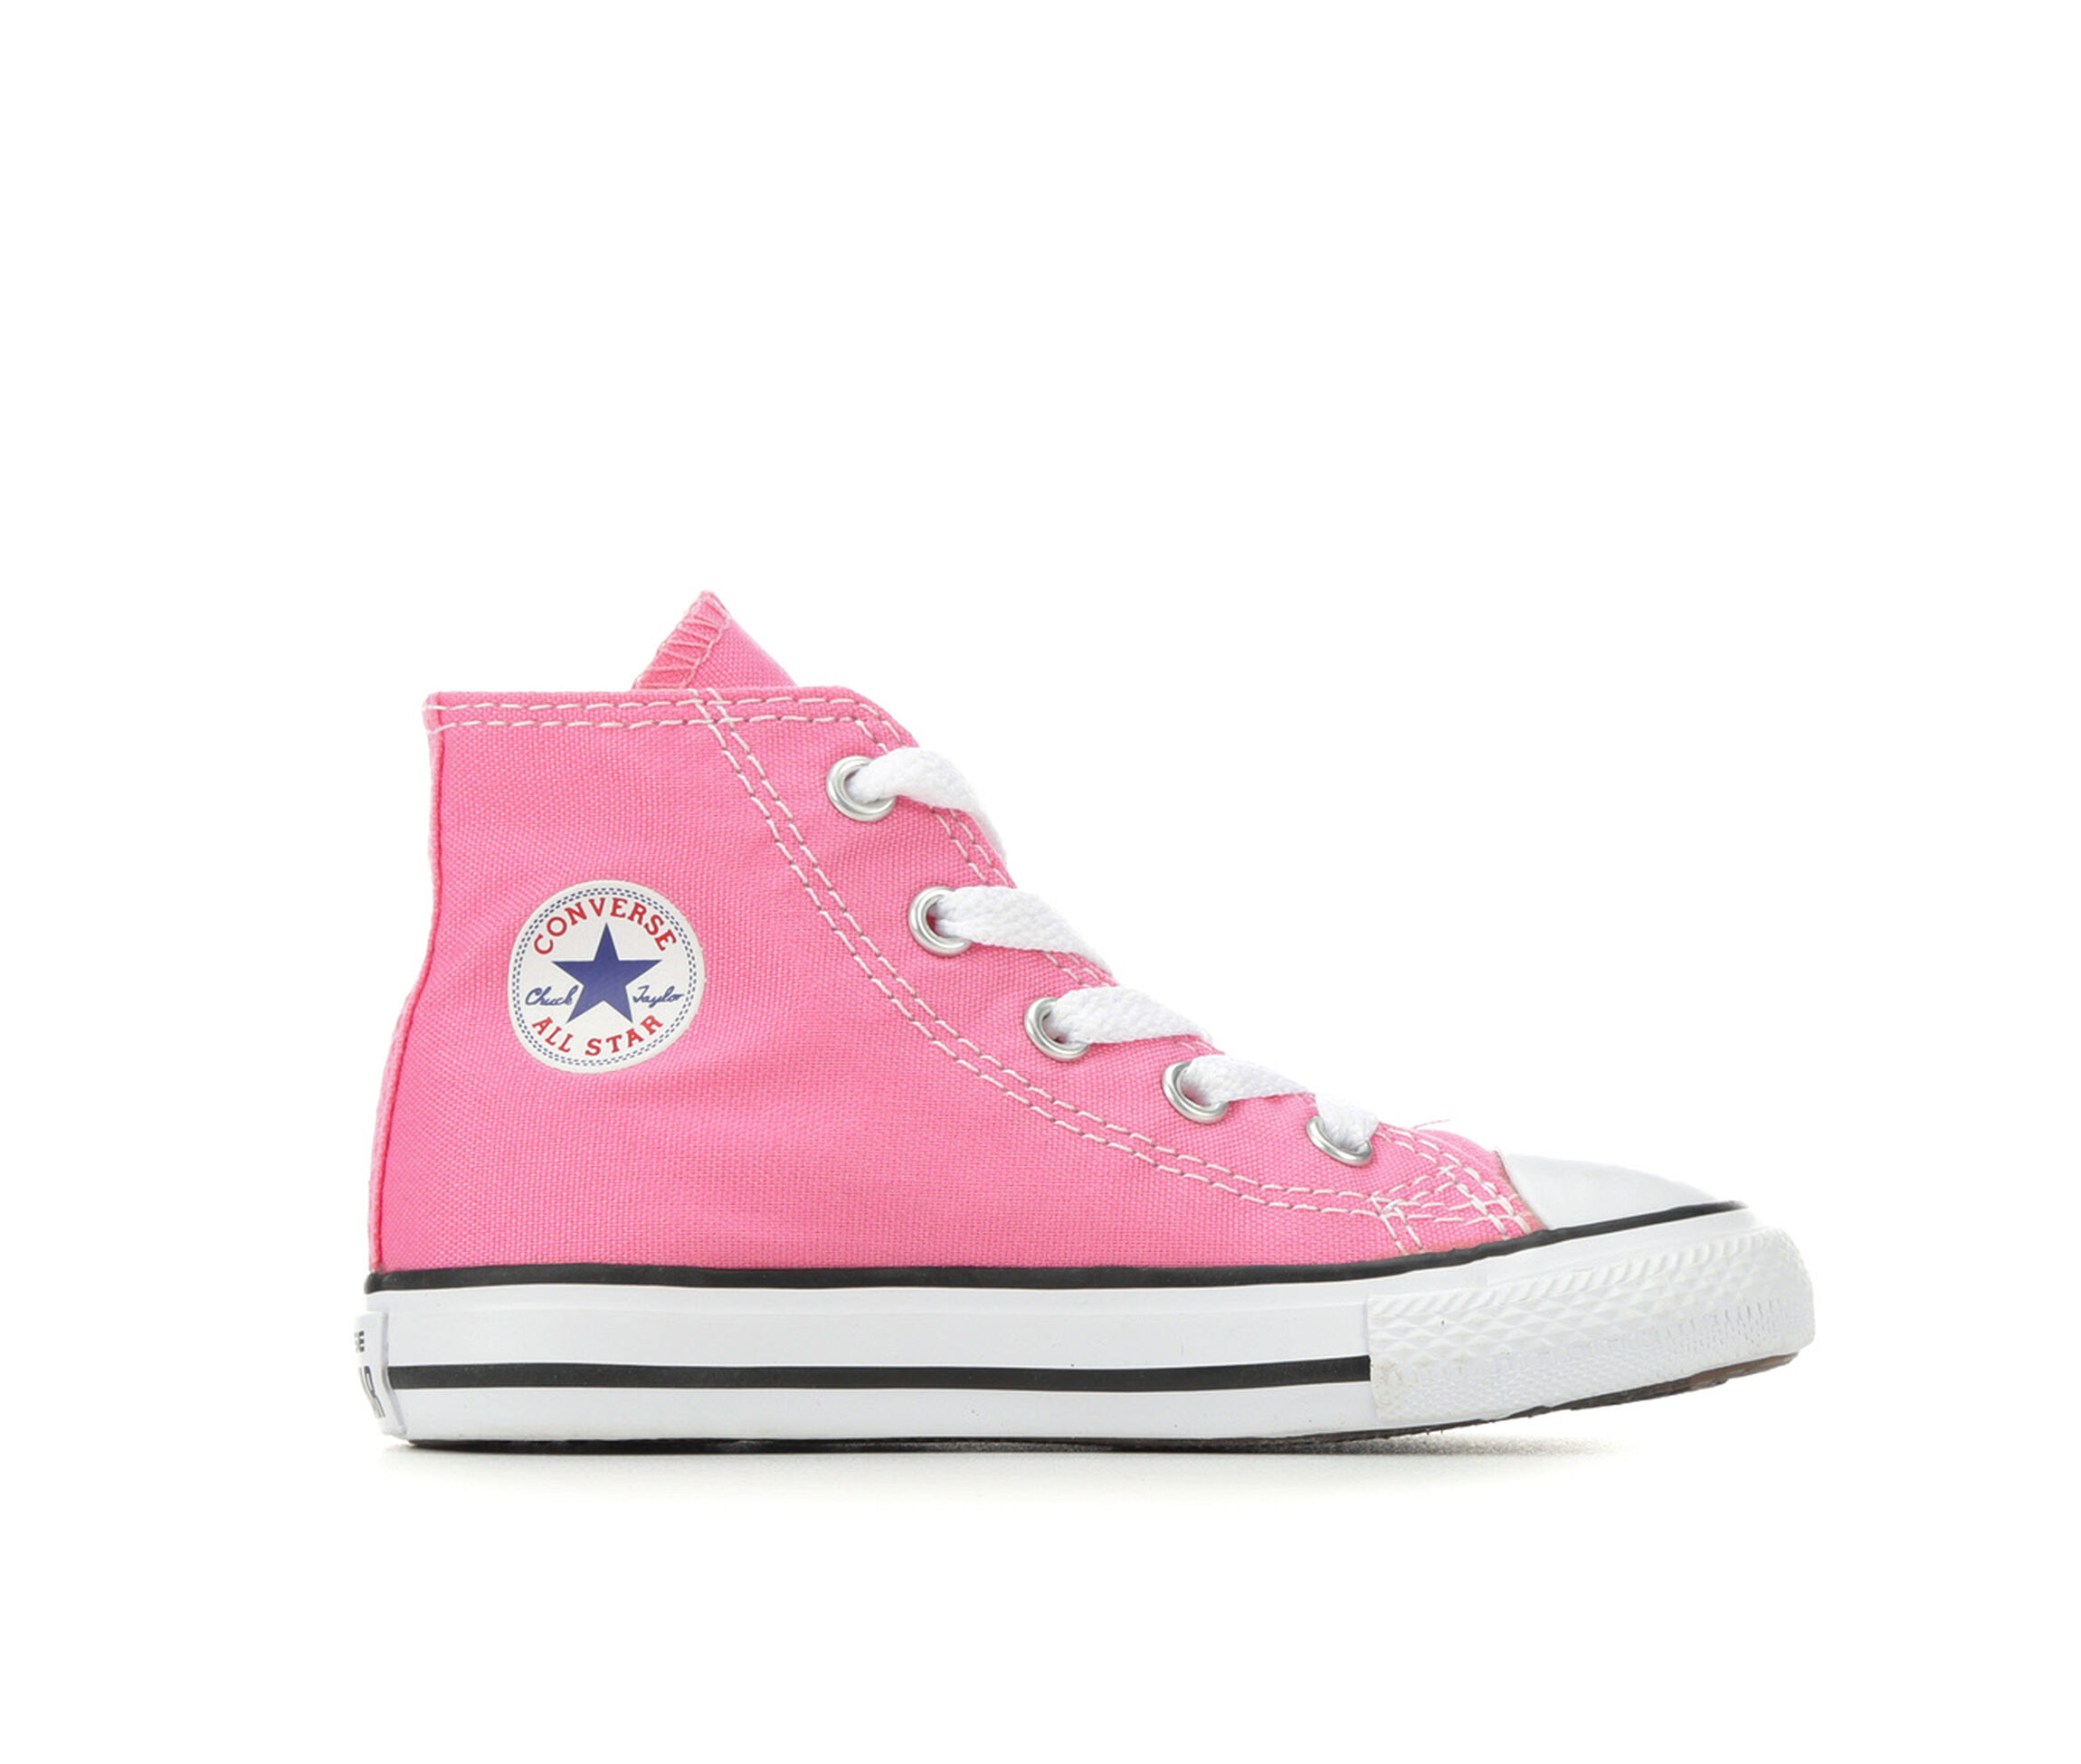 Infant & Chuck Taylor Star Hi Sneakers